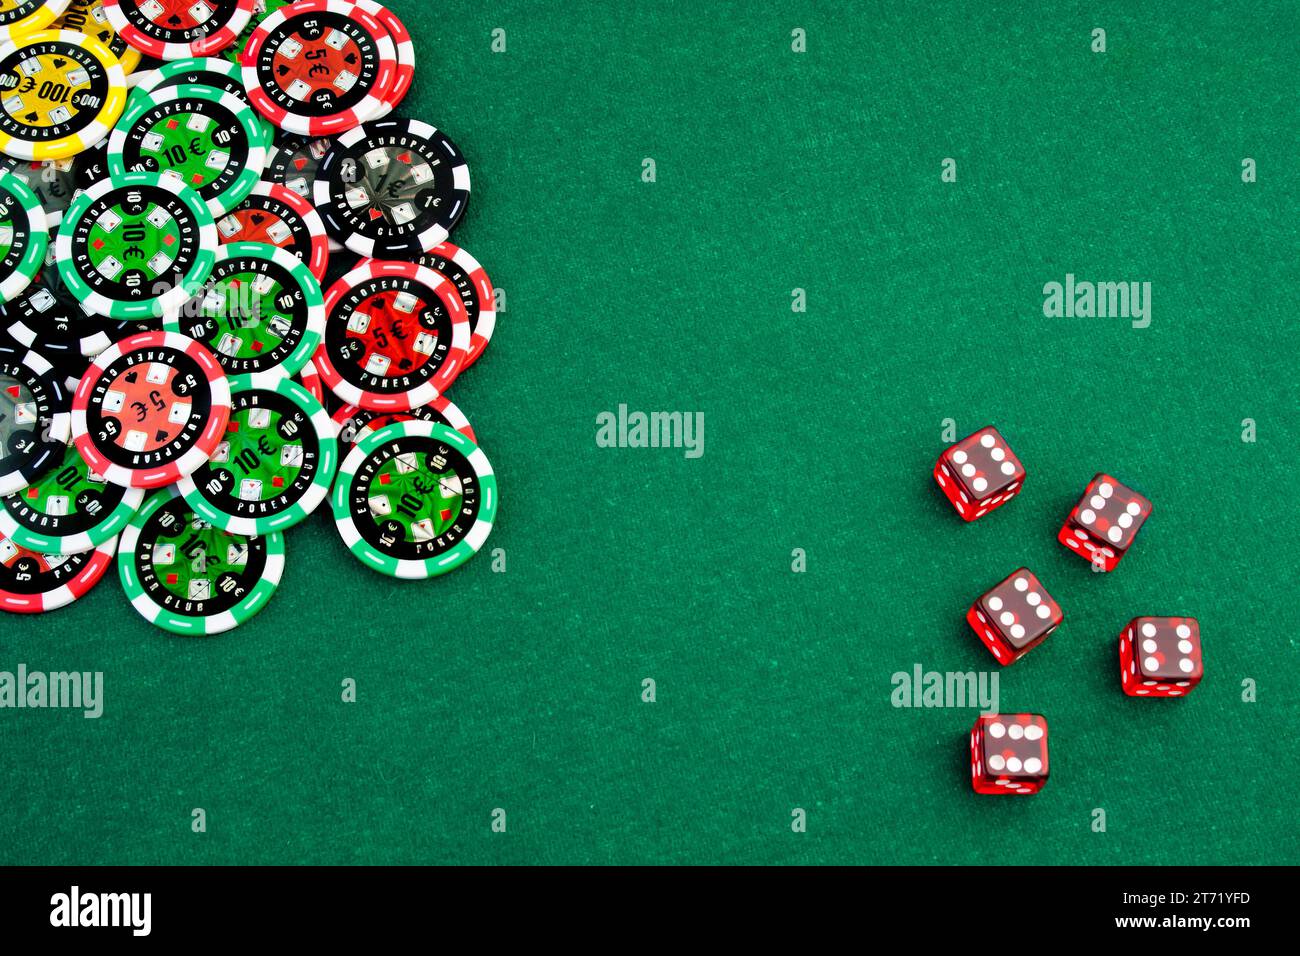 Gambling chips and dice in corner in of a green fabric background Stock Photo